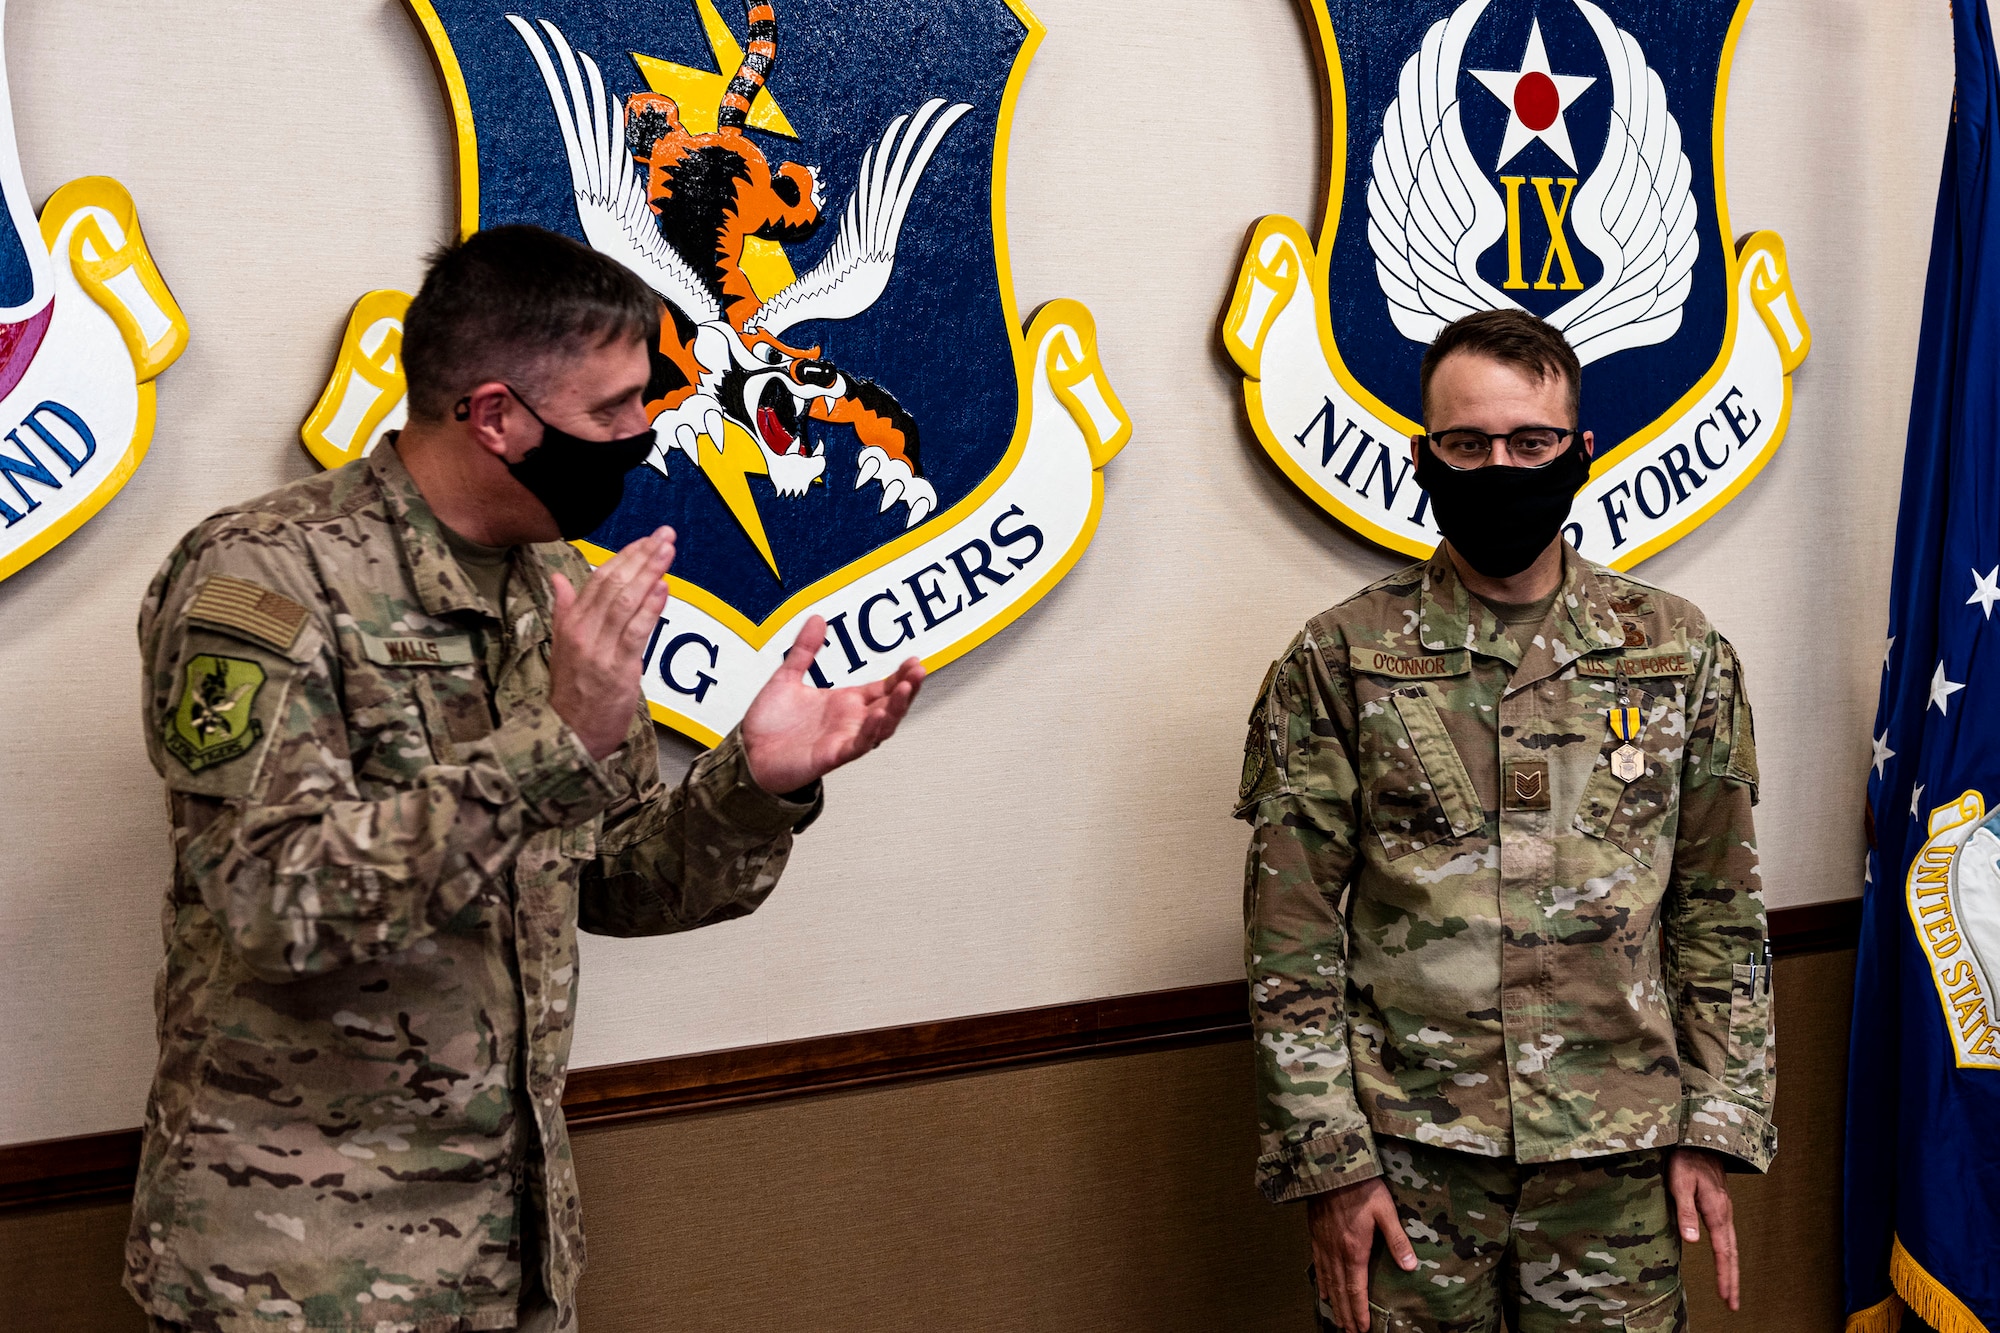 Photo of Airman getting congratulated by commander.